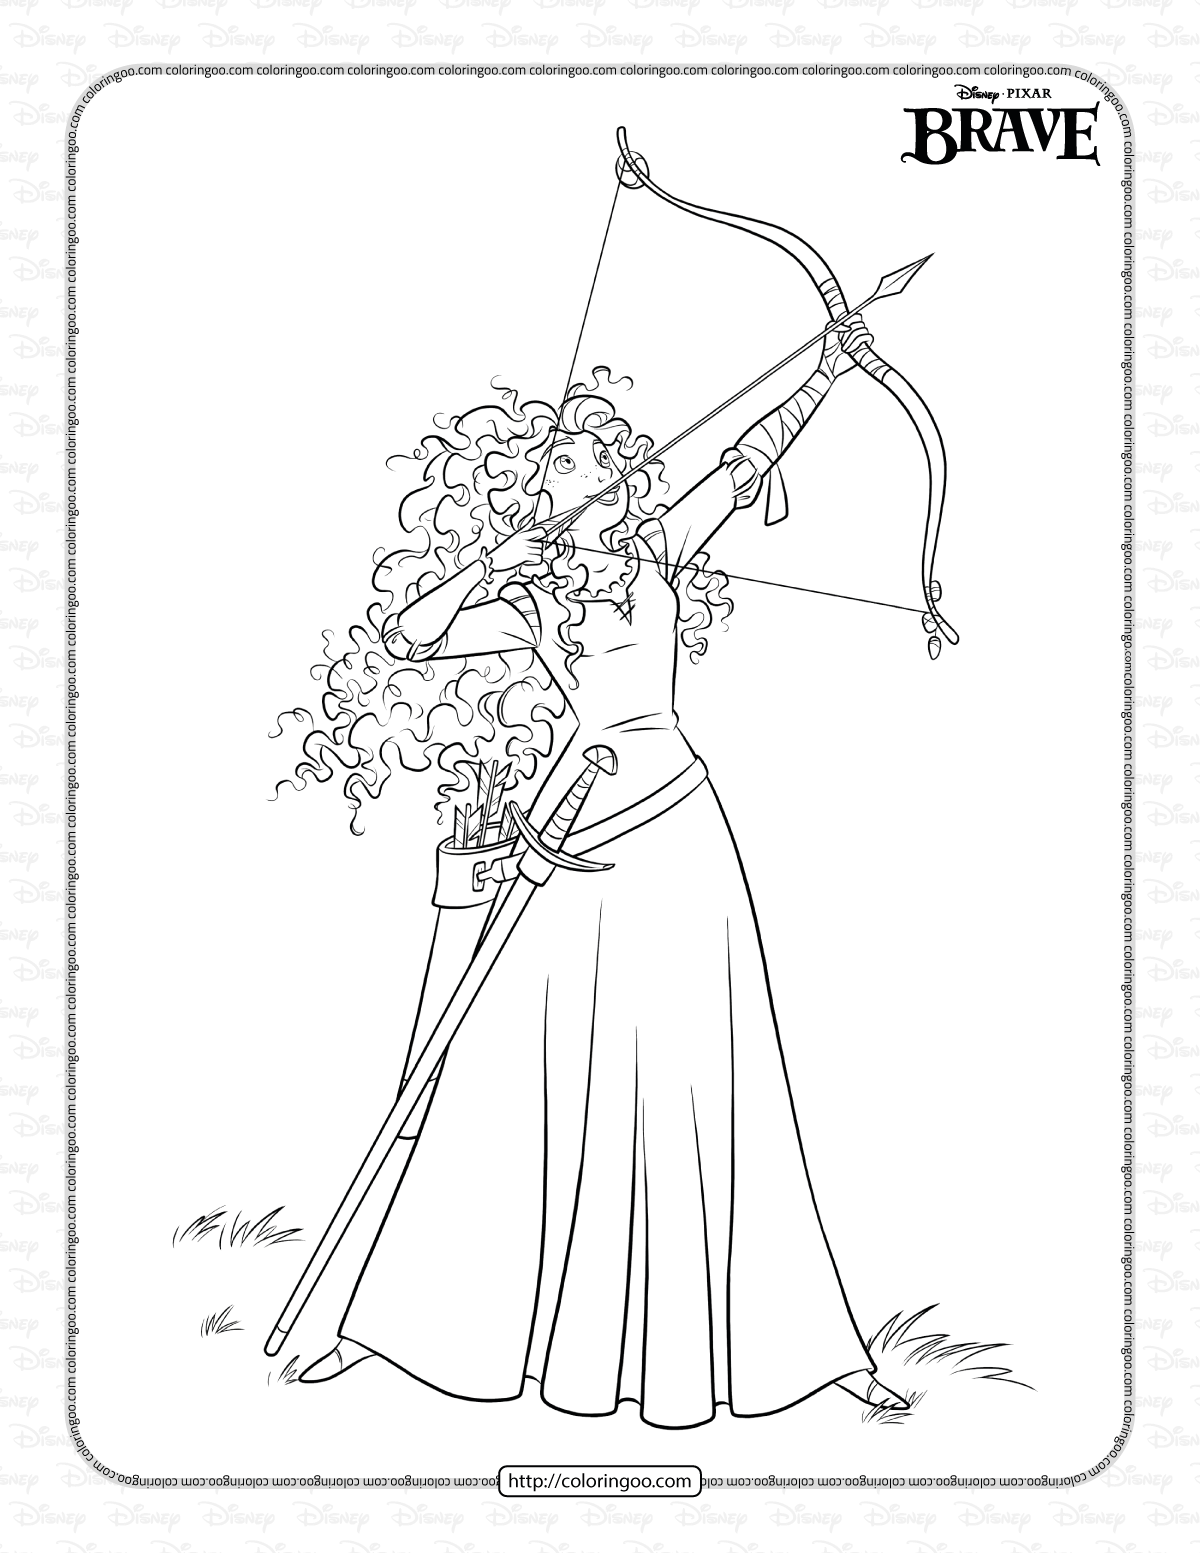 printable brave coloring pages for kids